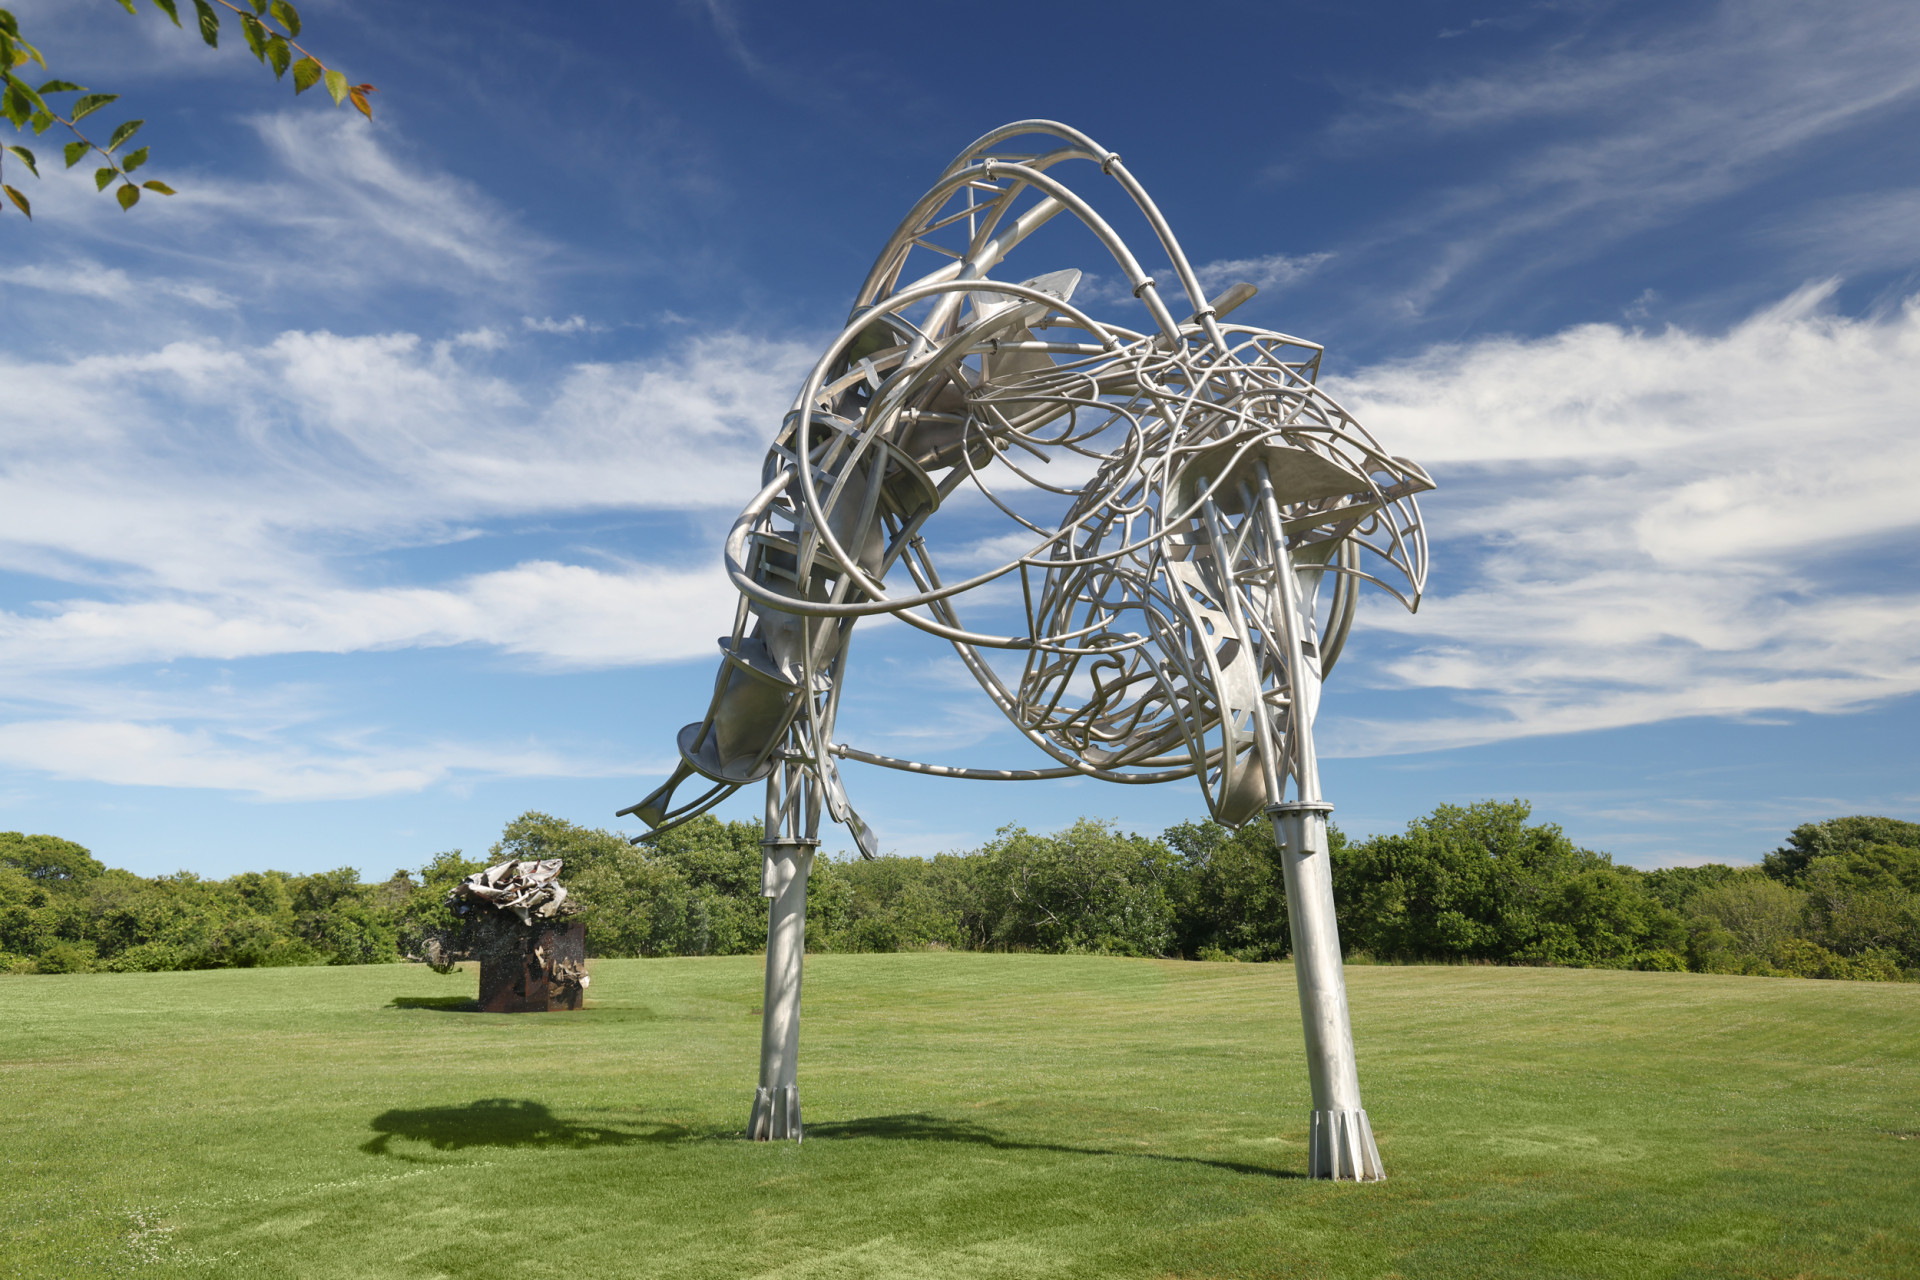 A photograph of an arcing metallic sculpture with swooping, curving rods, standing in a green field under a blue sky